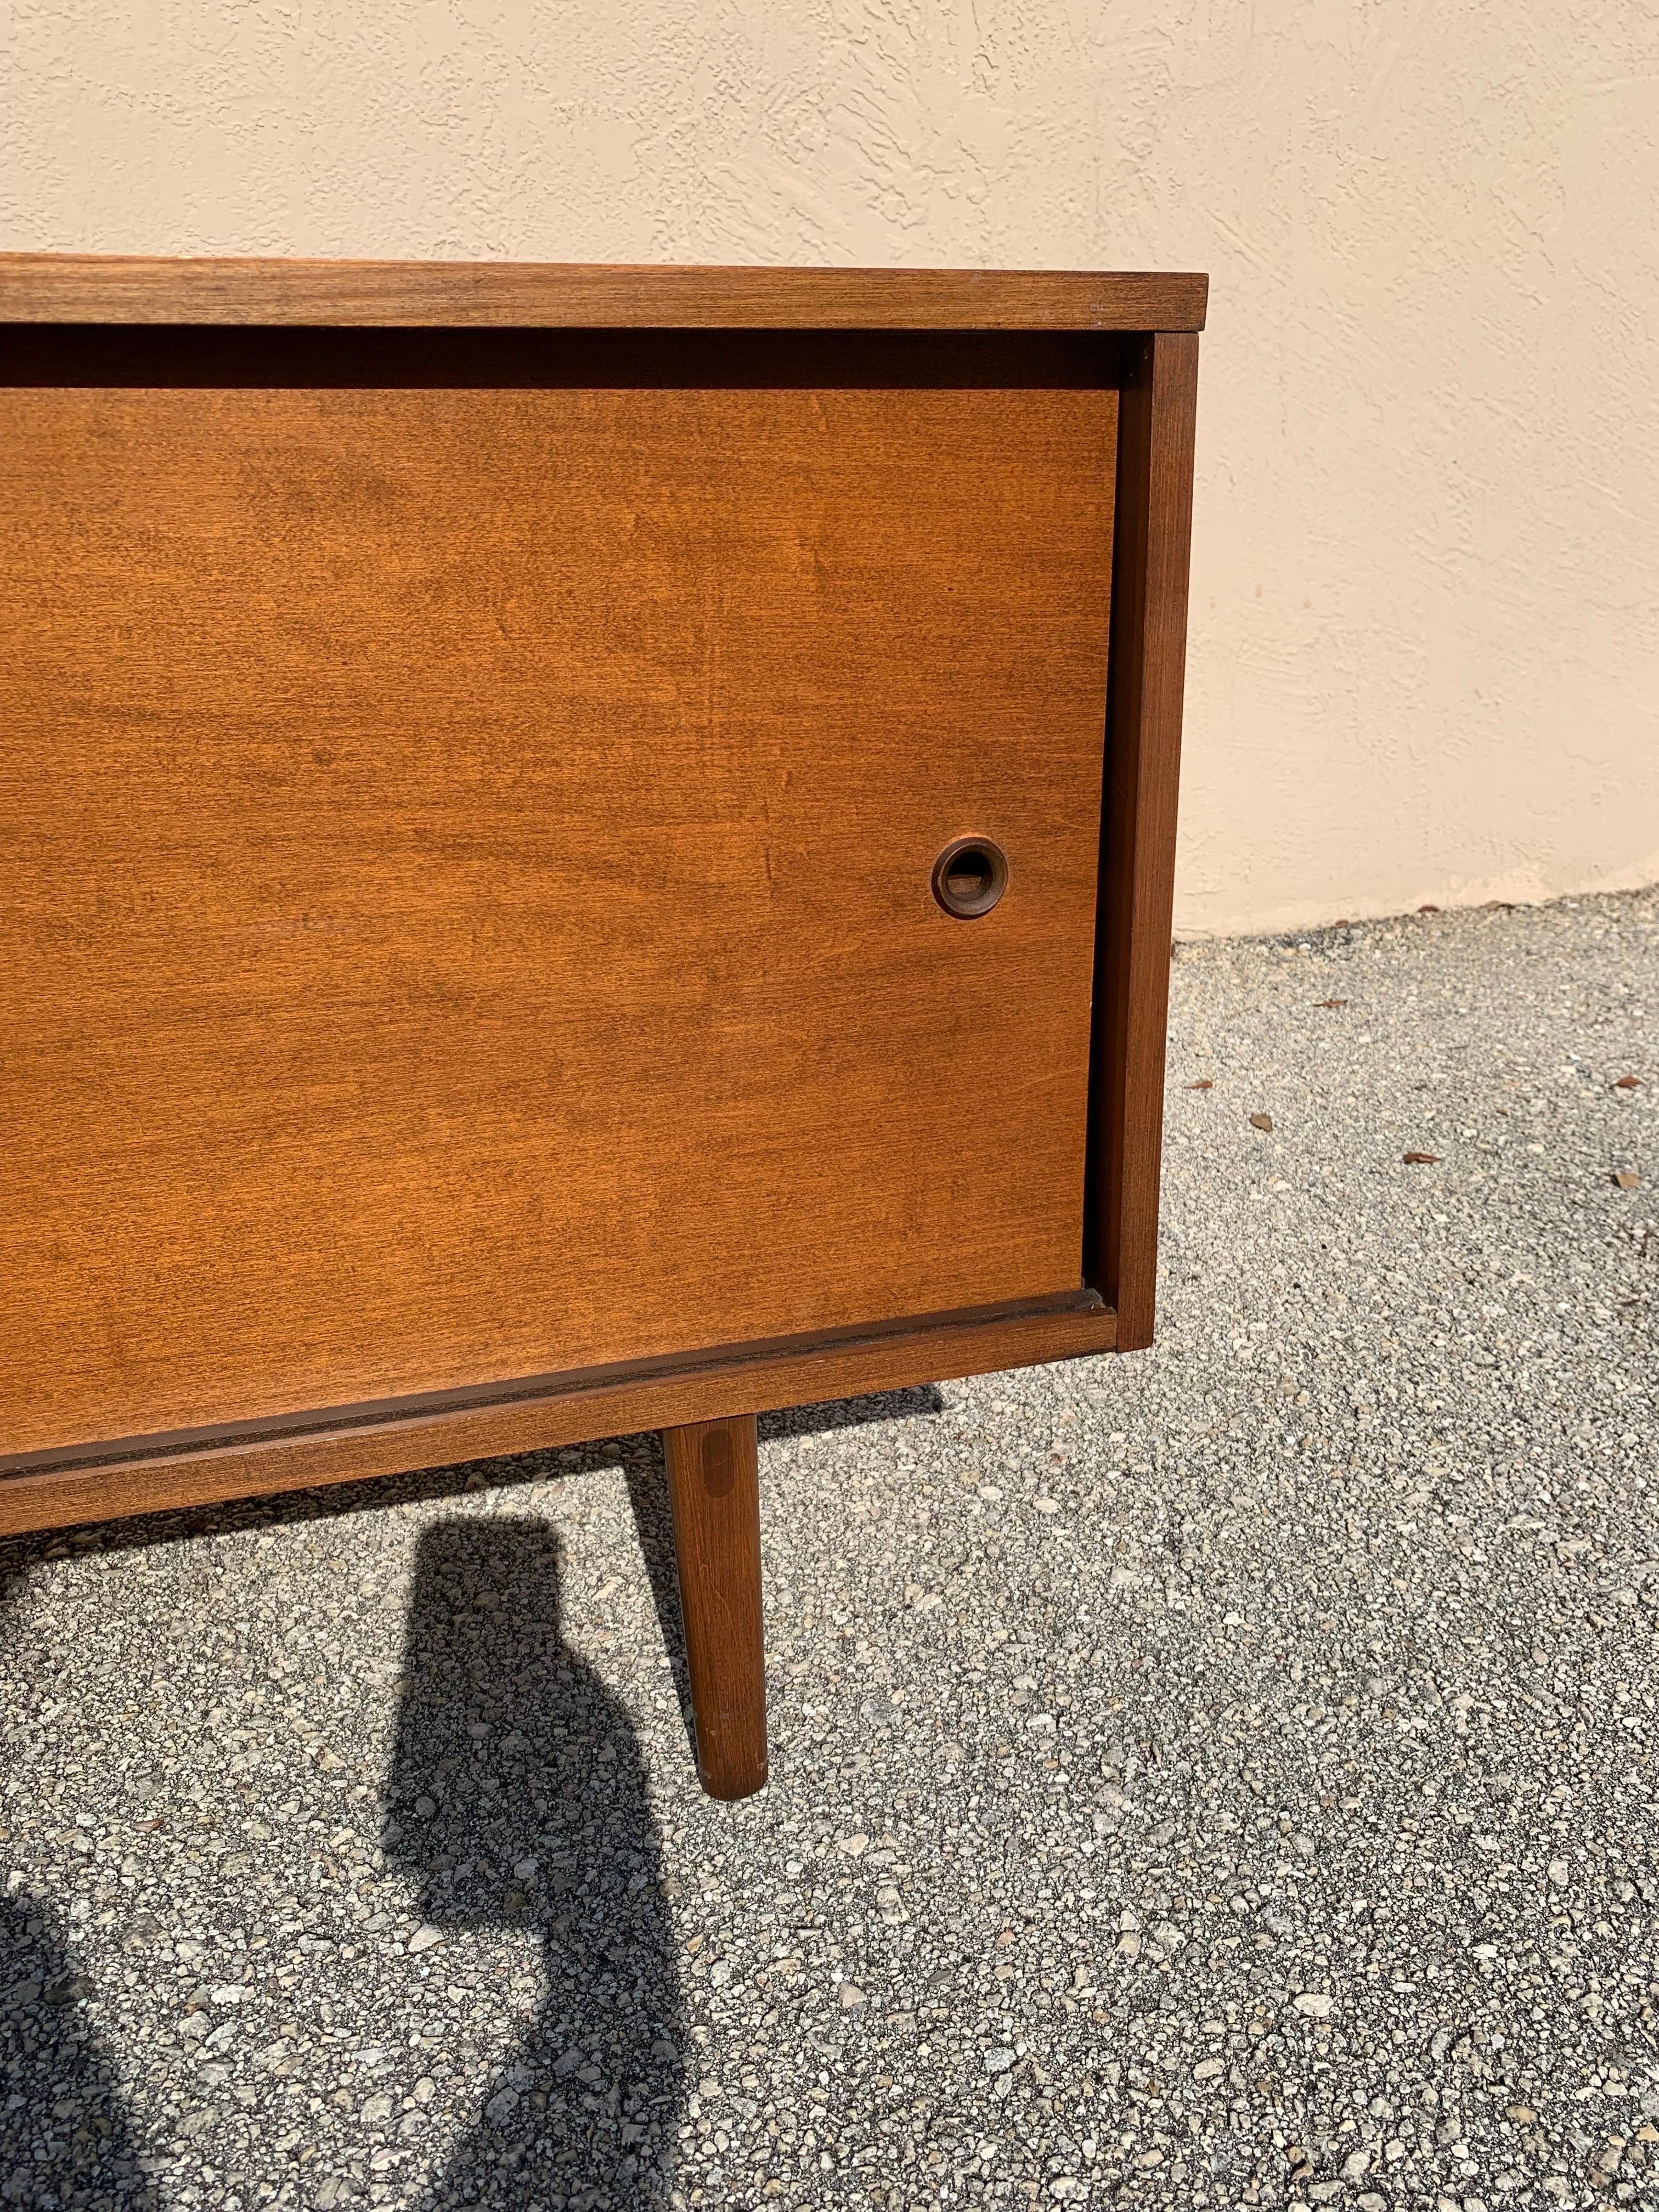 20th Century Mid-Century Modern Credenza by Paul McCobb for Planner Group #1513 For Sale